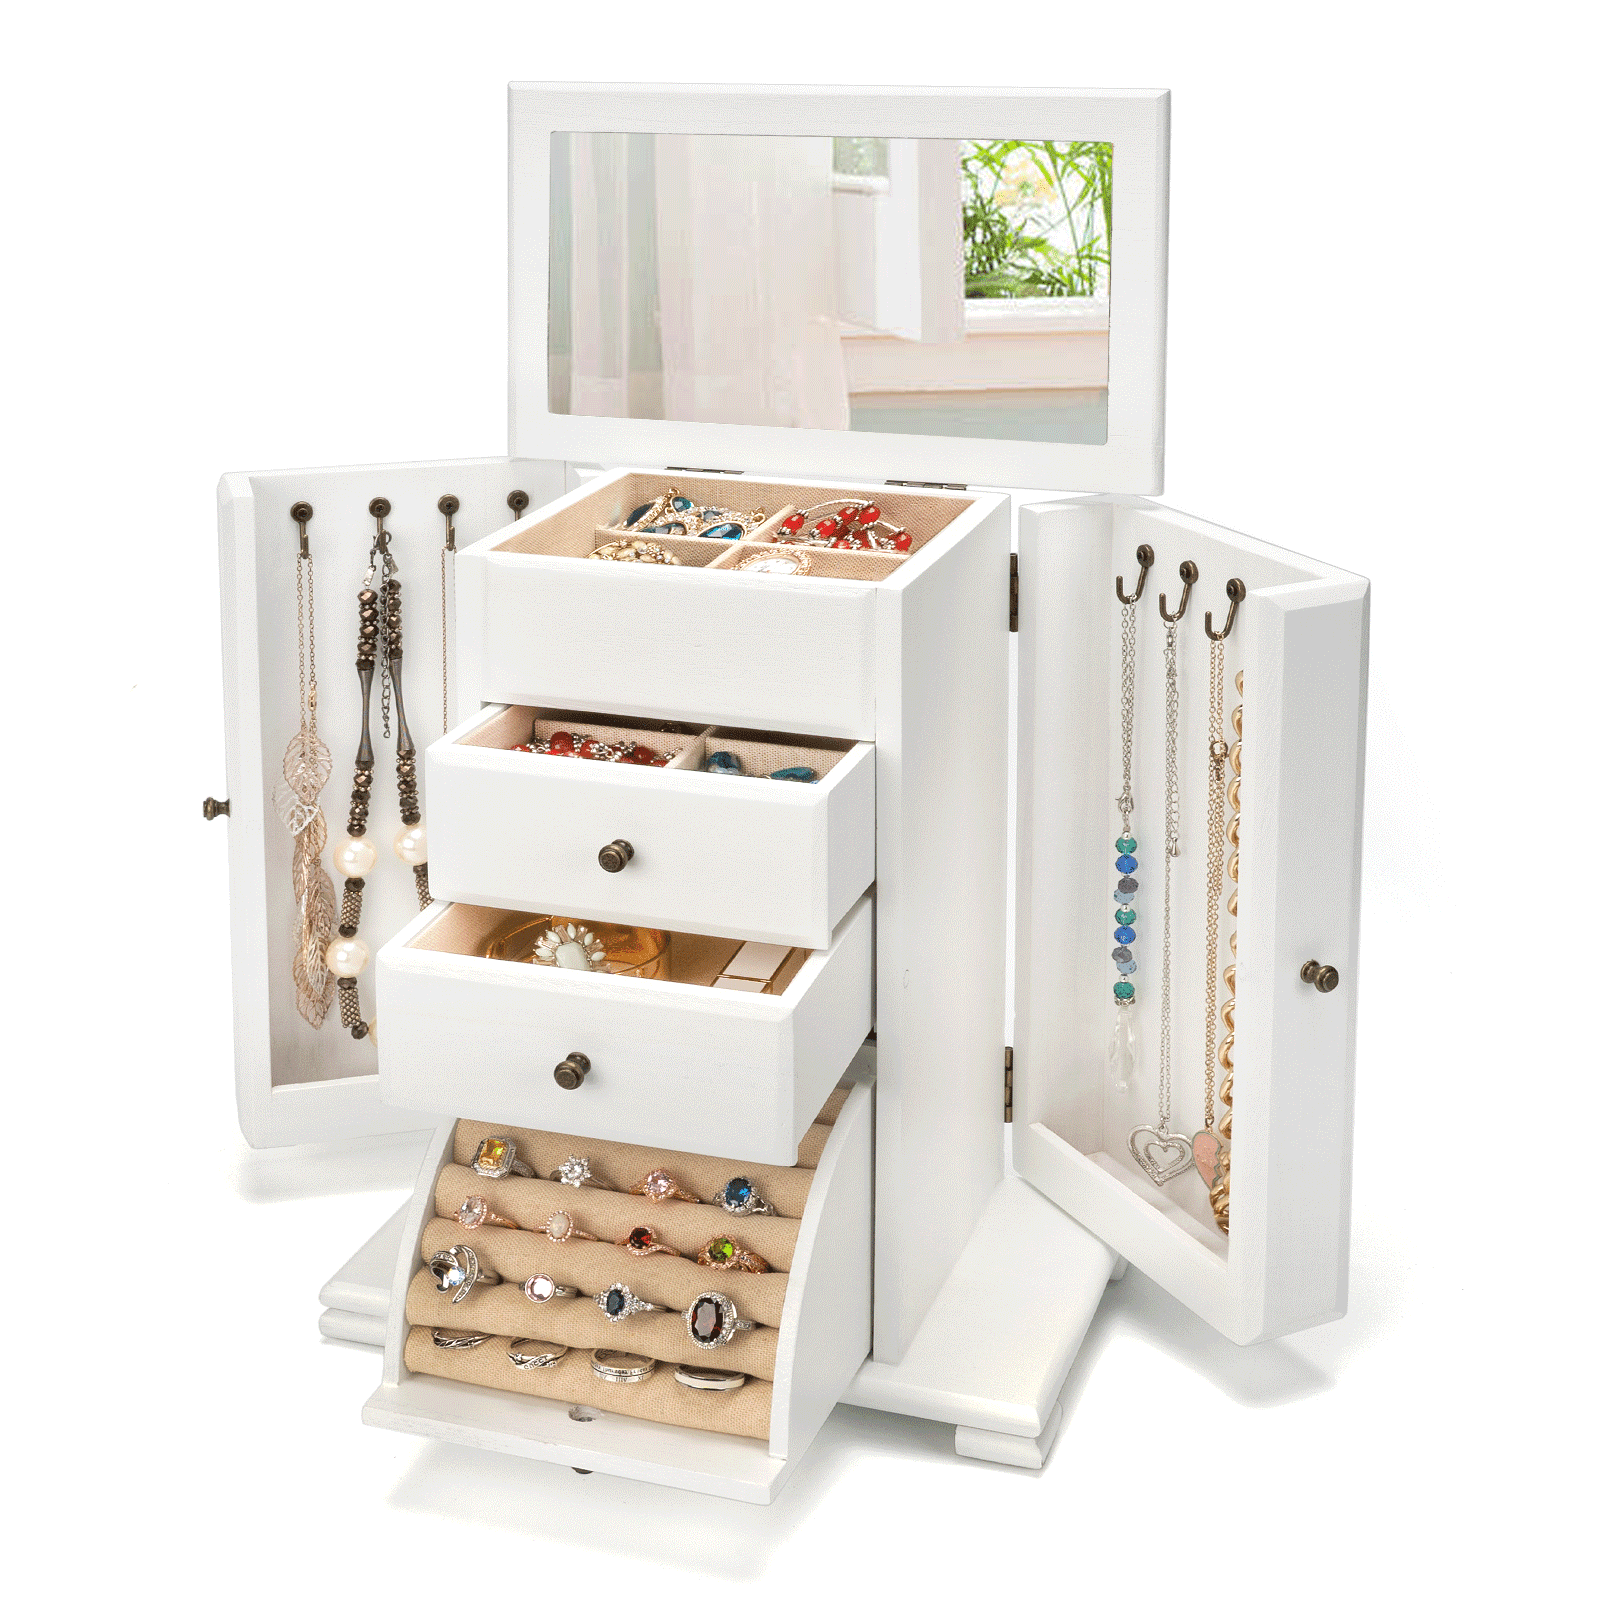 Poyilooo Jewelry Box Organizer, Large Jewelry Boxes for Women, Great  Storage Earring Organizer Display for Necklace Earring Ring Bracelet,  Rustic Wood